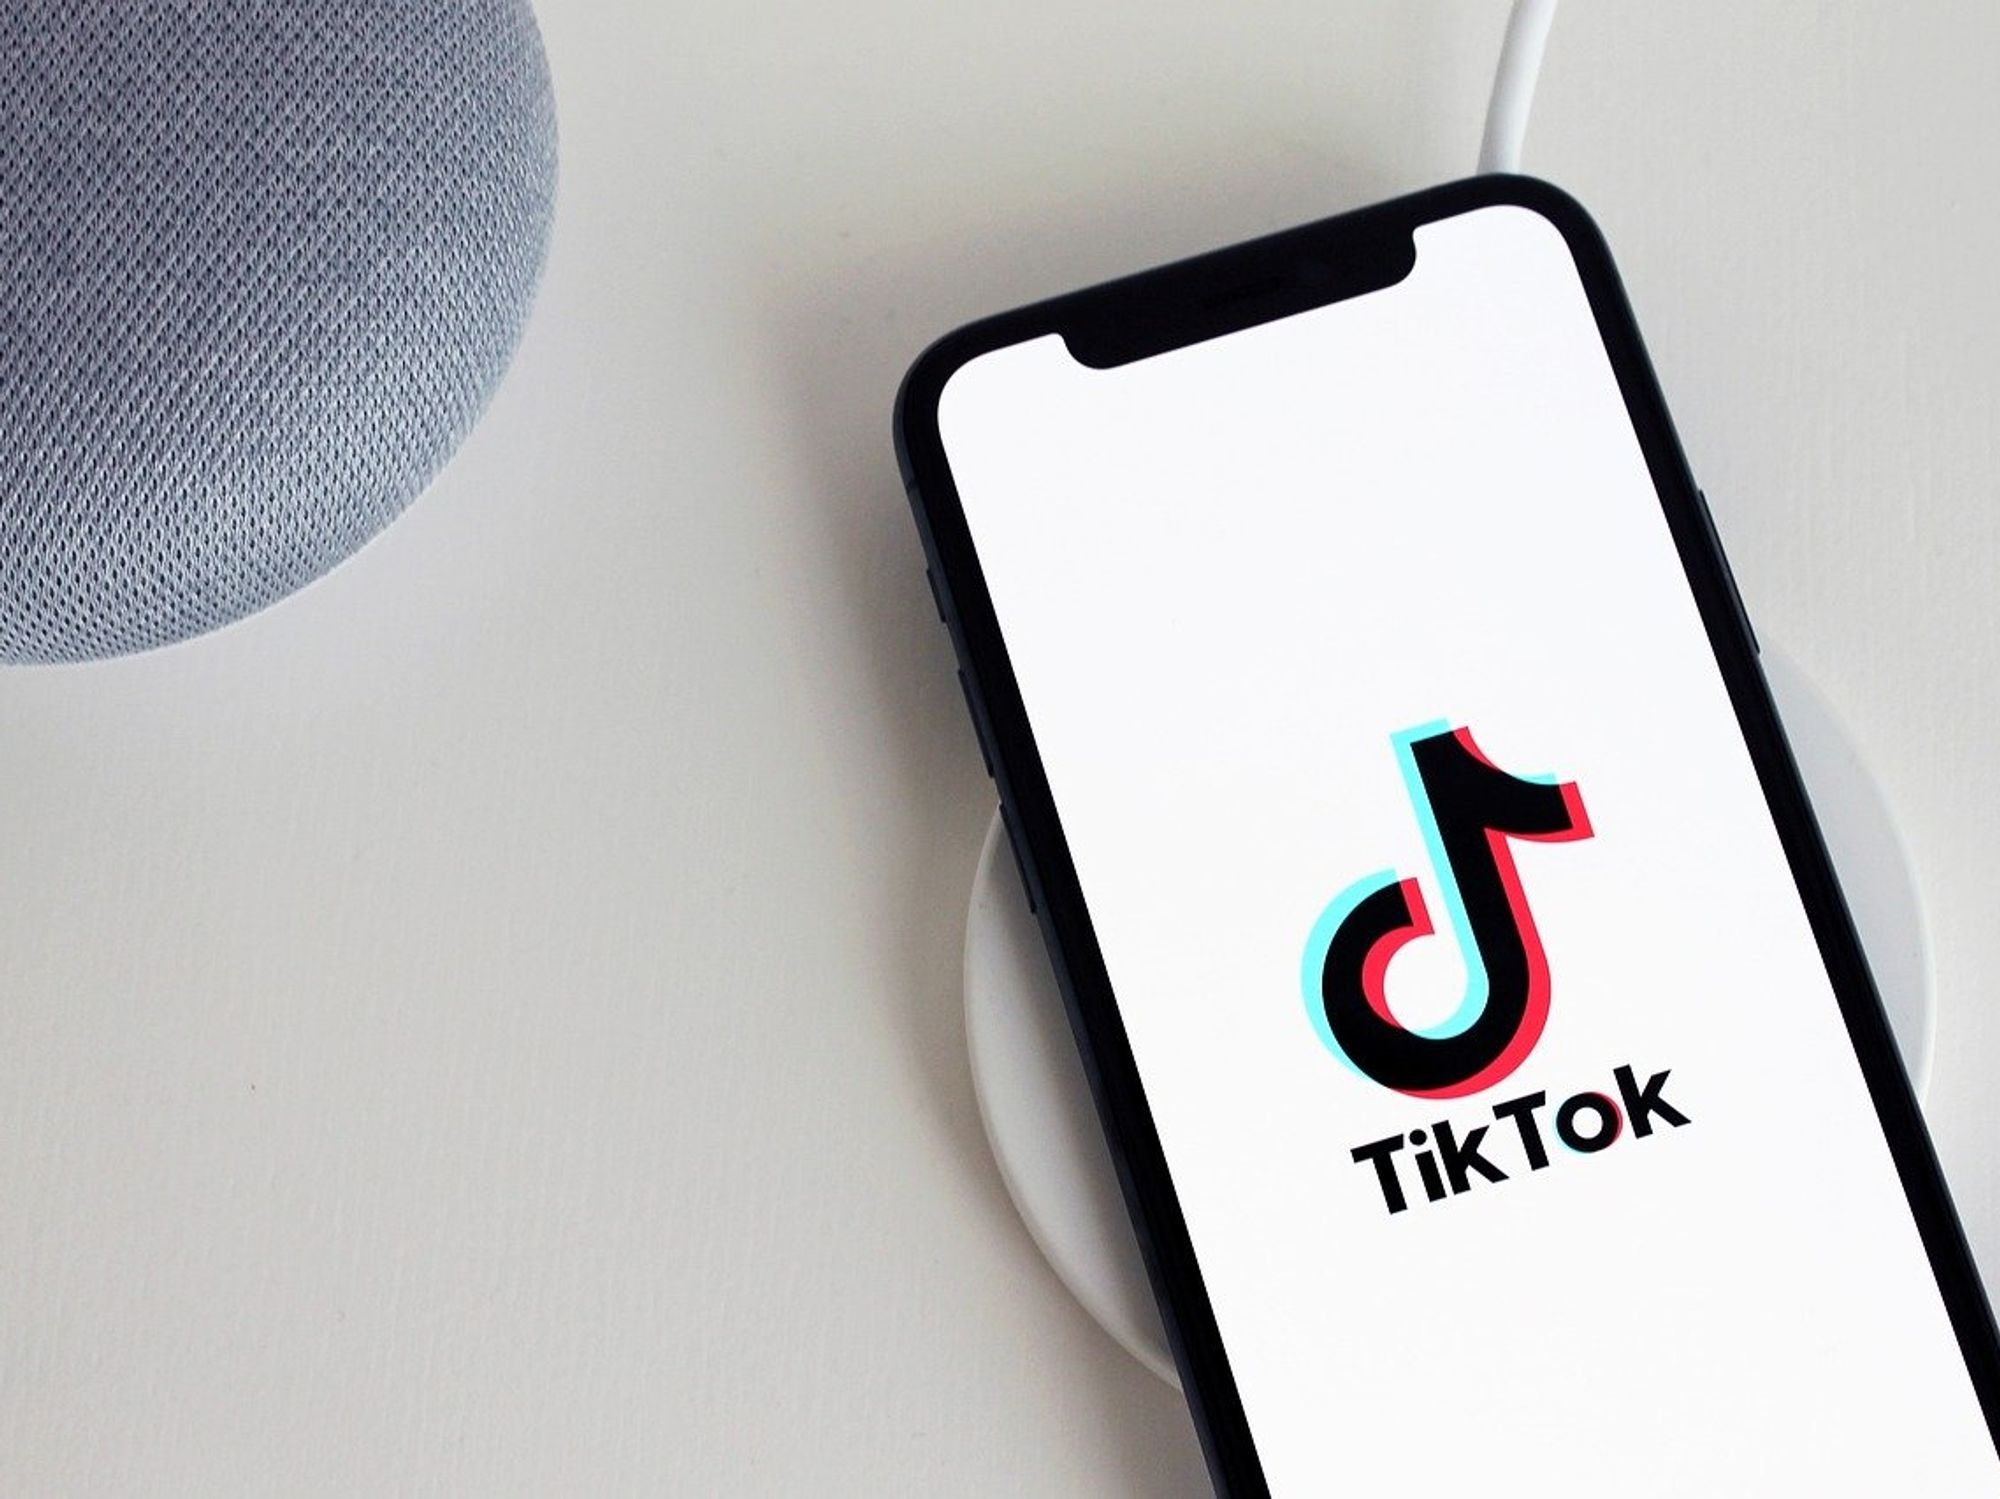 Child Privacy Advocates Take Aim at TikTok, Adding More Legal Issues for the Social Media App